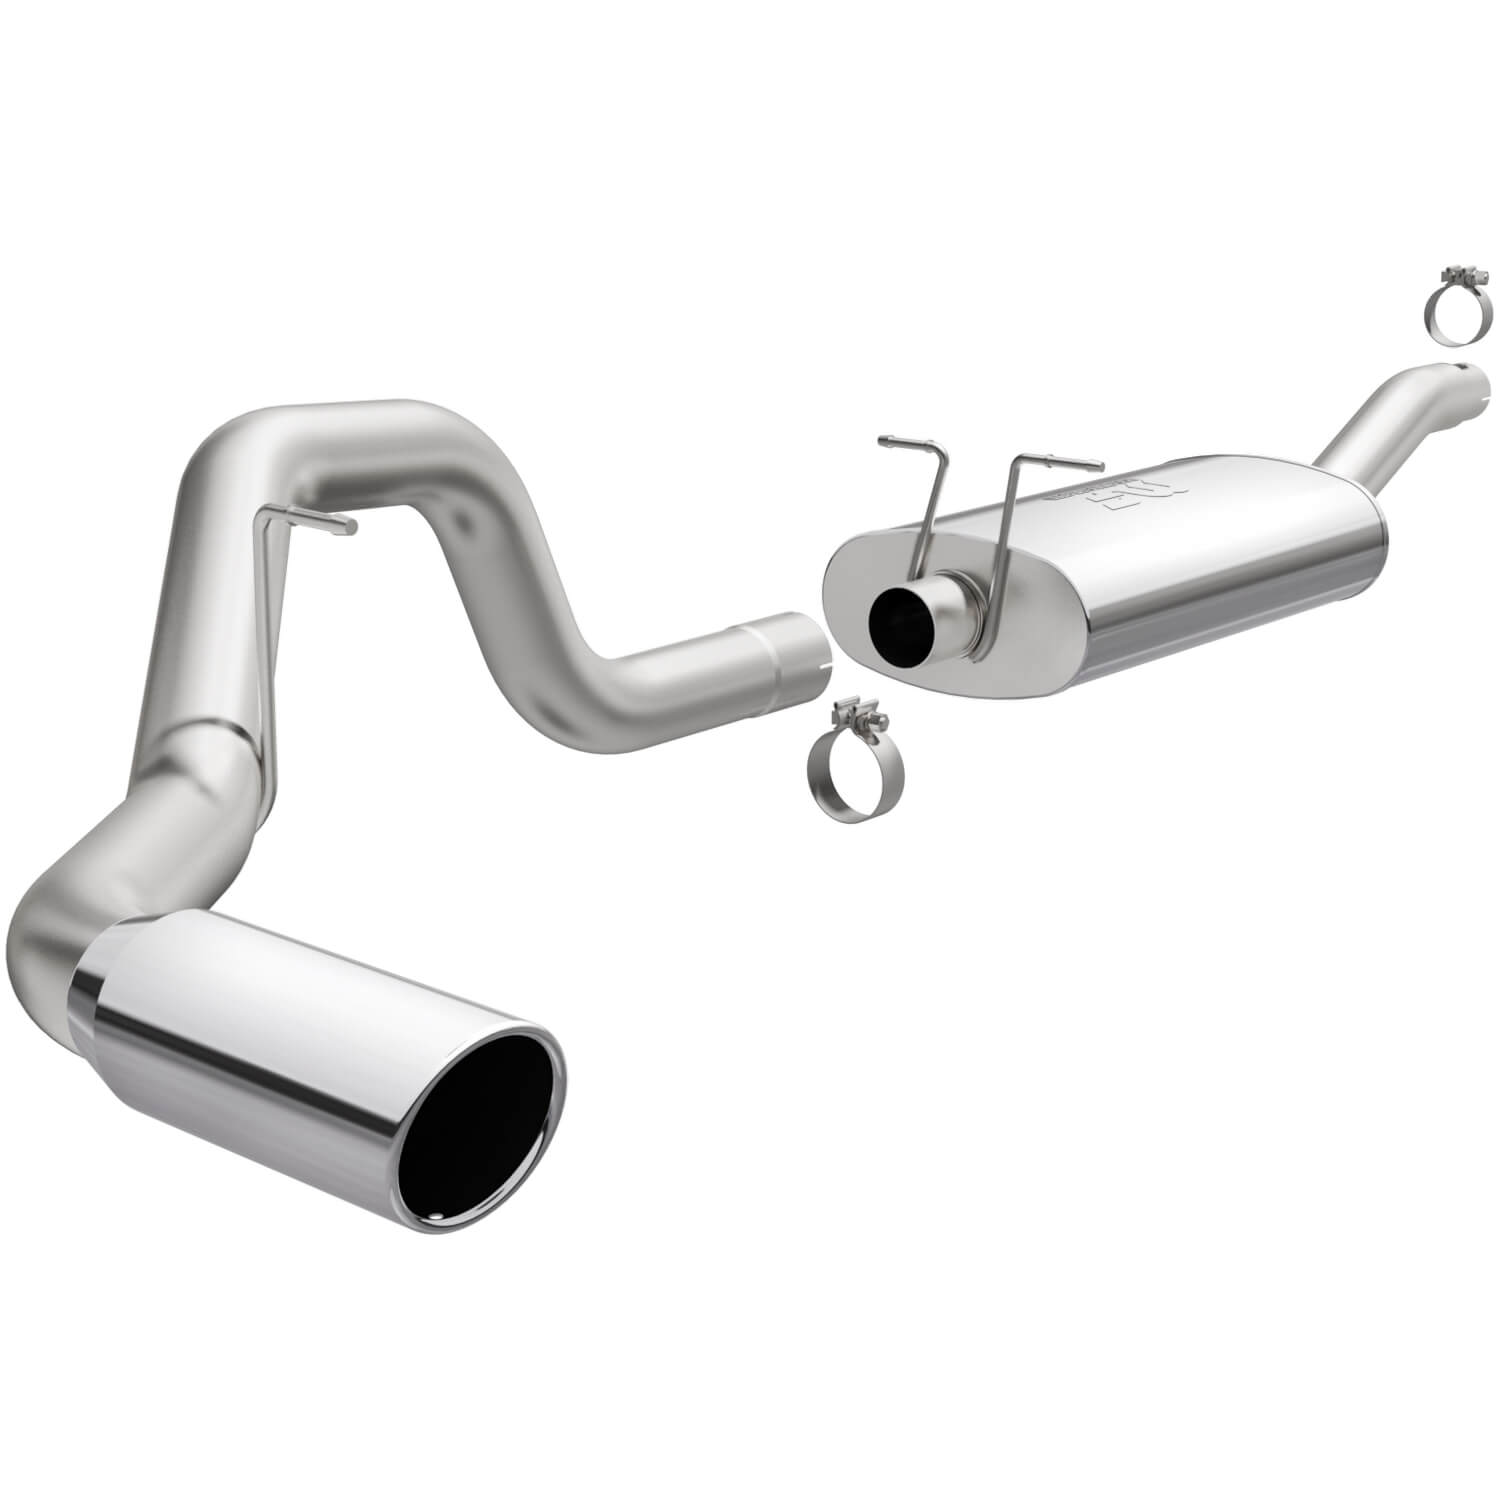 MF Series Cat-Back Exhaust System 1997-2000 Ford Expedition 4.6L/5.4L V8